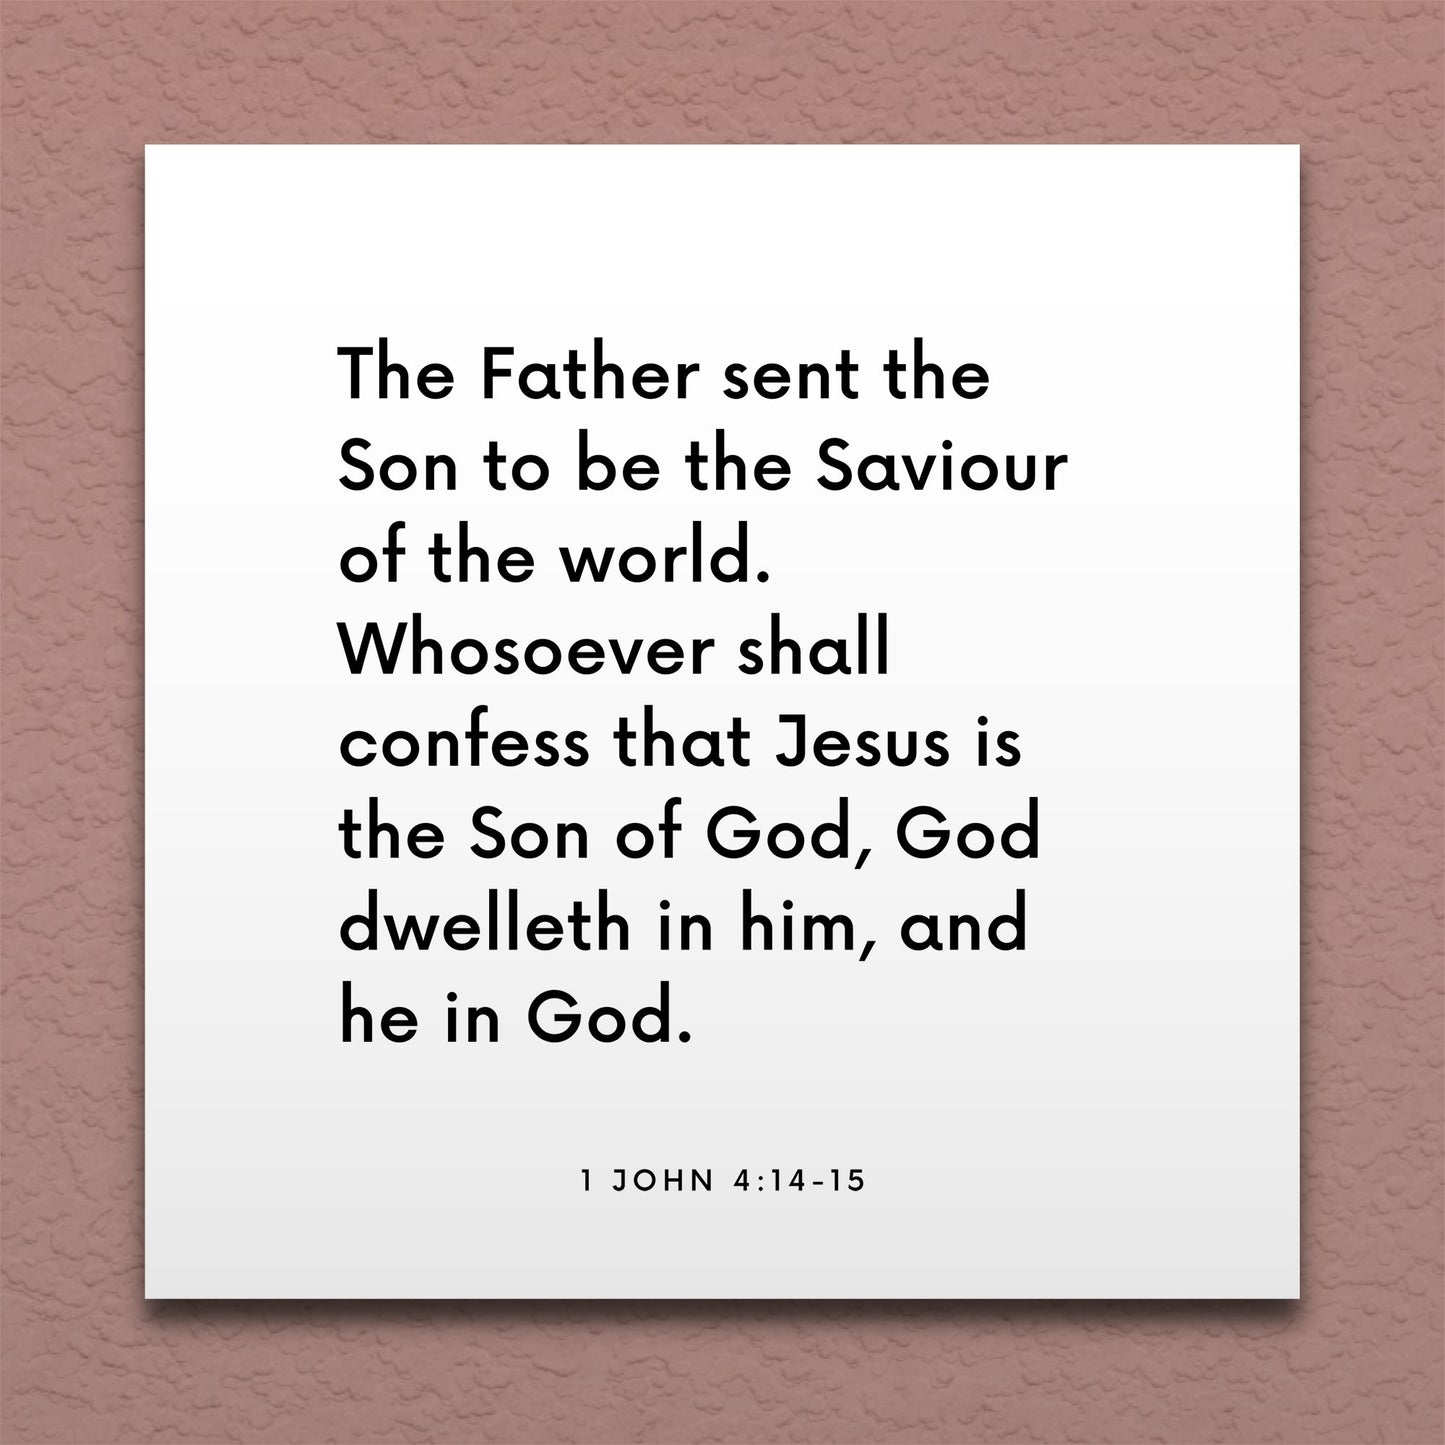 Wall-mounted scripture tile for 1 John 4:14-15 - "Whosoever shall confess that Jesus is the Son"